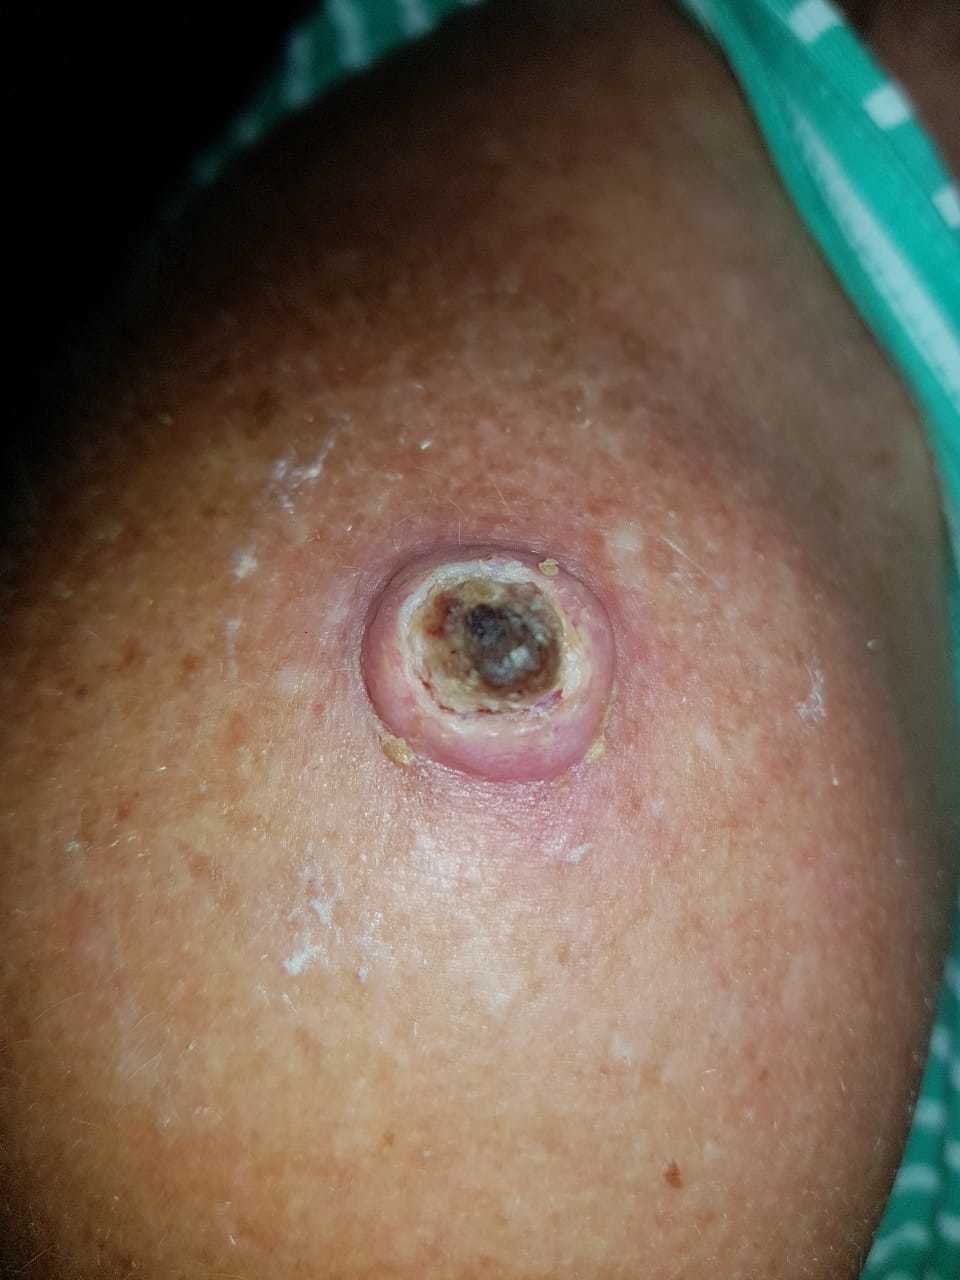 Lady with cancer sore on her shoulder before using AP Herbal cream